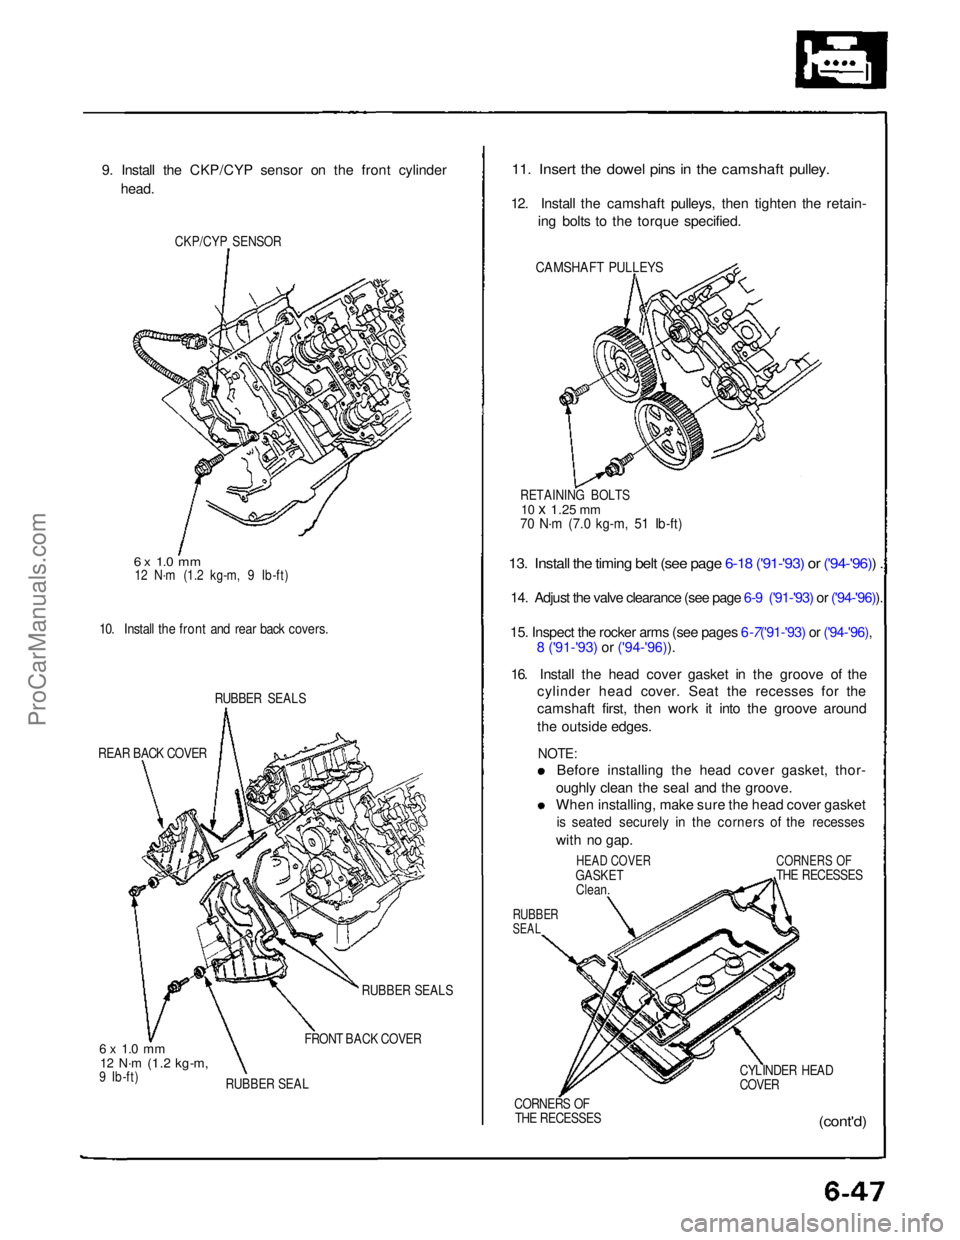 ACURA NSX 1991  Service Repair Manual 
9. Install the CKP/CYP sensor on the front cylinder
head.

CKP/CYP SENSOR

6 x 1.0 mm
 12 N·m (1.2 kg-m, 9 Ib-ft)
10. Install the front and rear back covers.

 RUBBER SEALS
REAR BACK COVER

6 x 1.0 